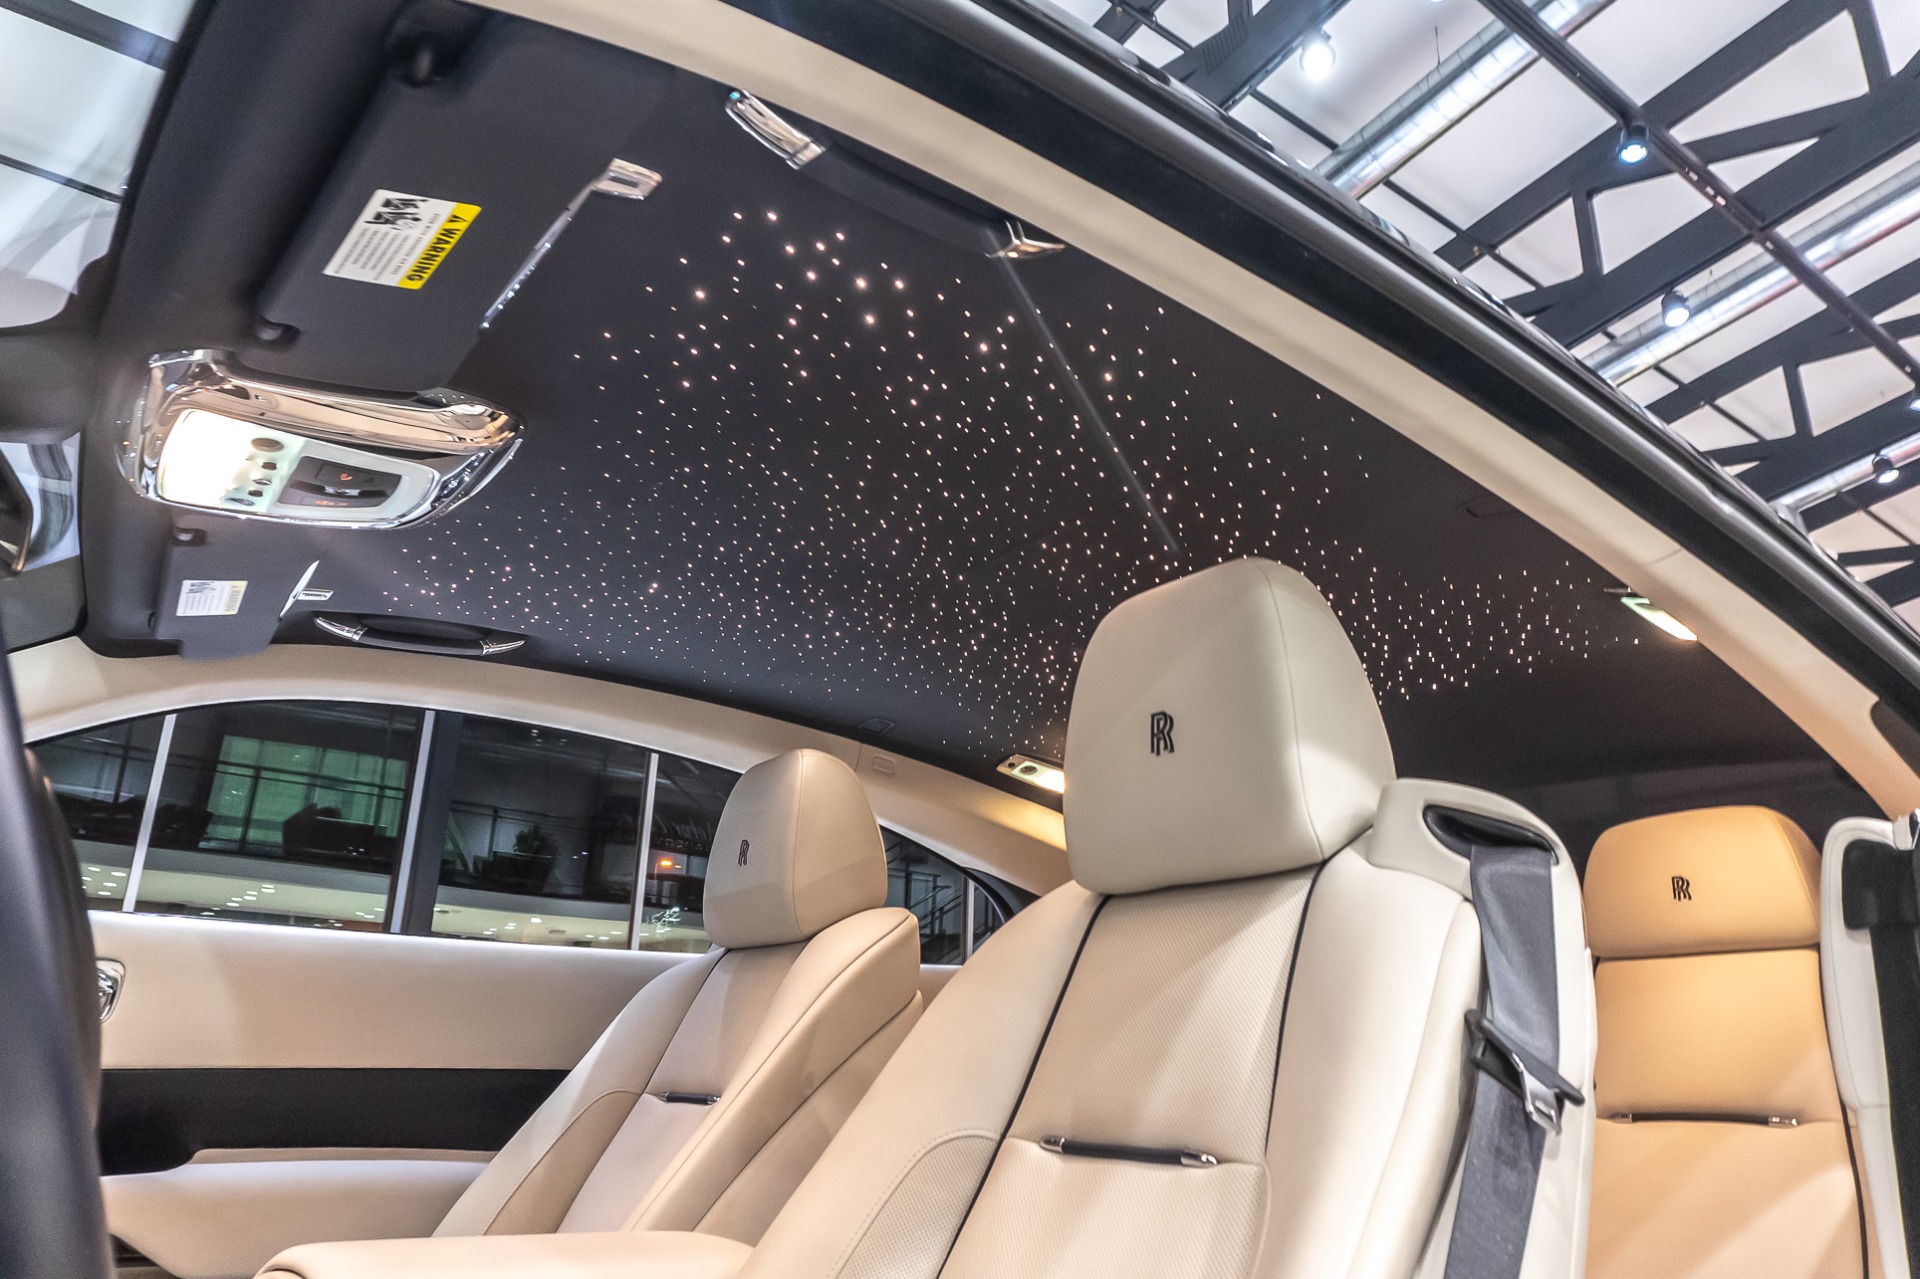 Volkswagens Starlight Headliner Will Be More Advanced Than RollsRoyces   CarBuzz